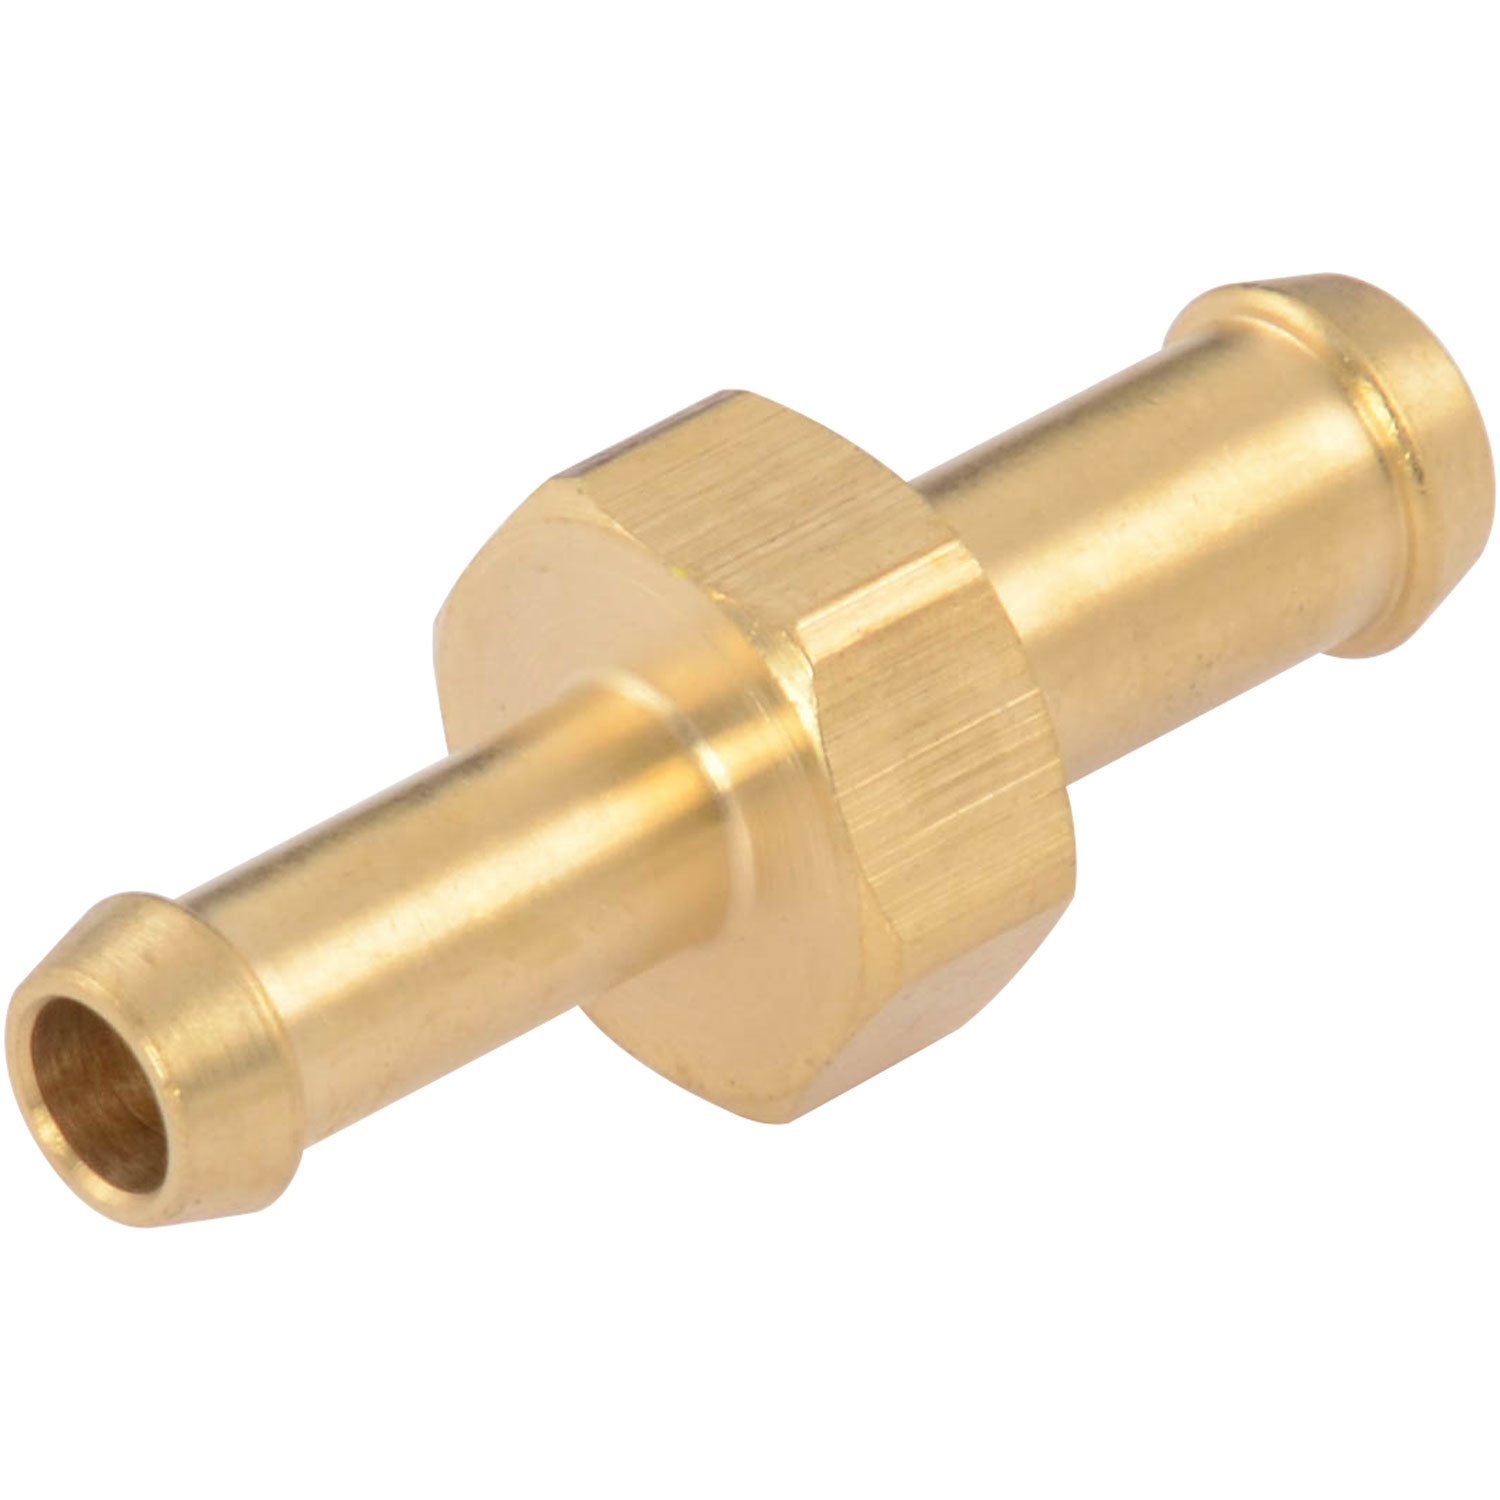 JEGS 15945: Brass Hose Adapter for 5/16 in. to 1/4 in. Hose - JEGS